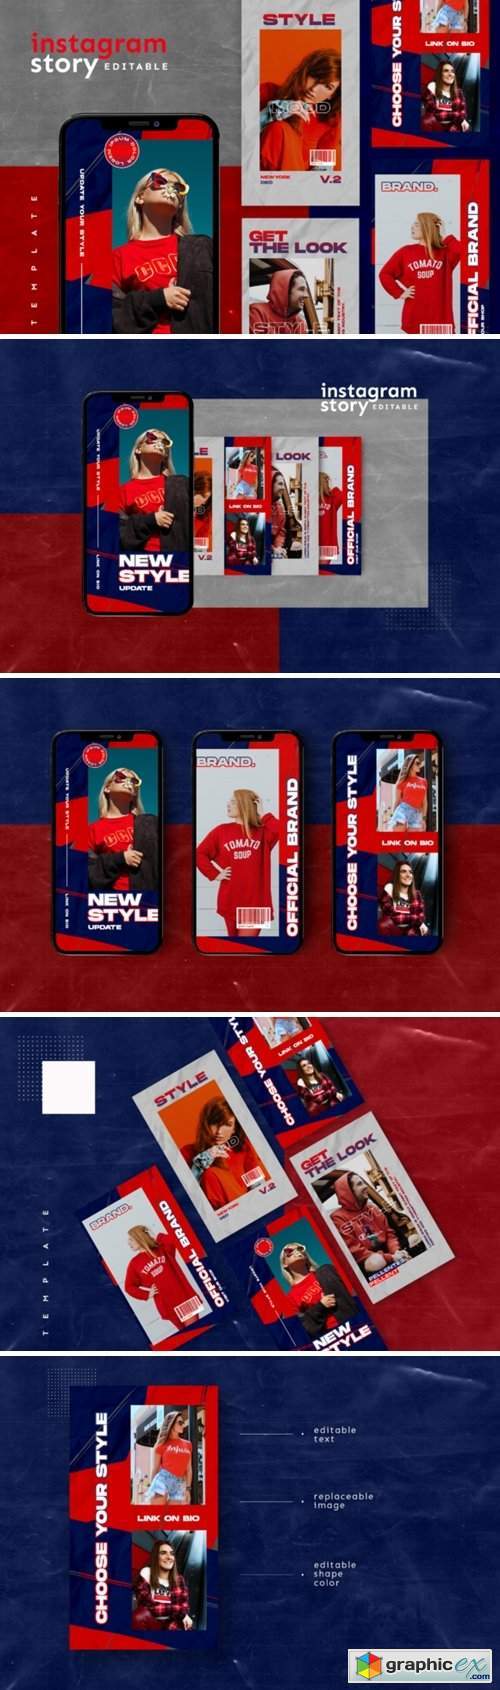 Instagram Story Template 2654135